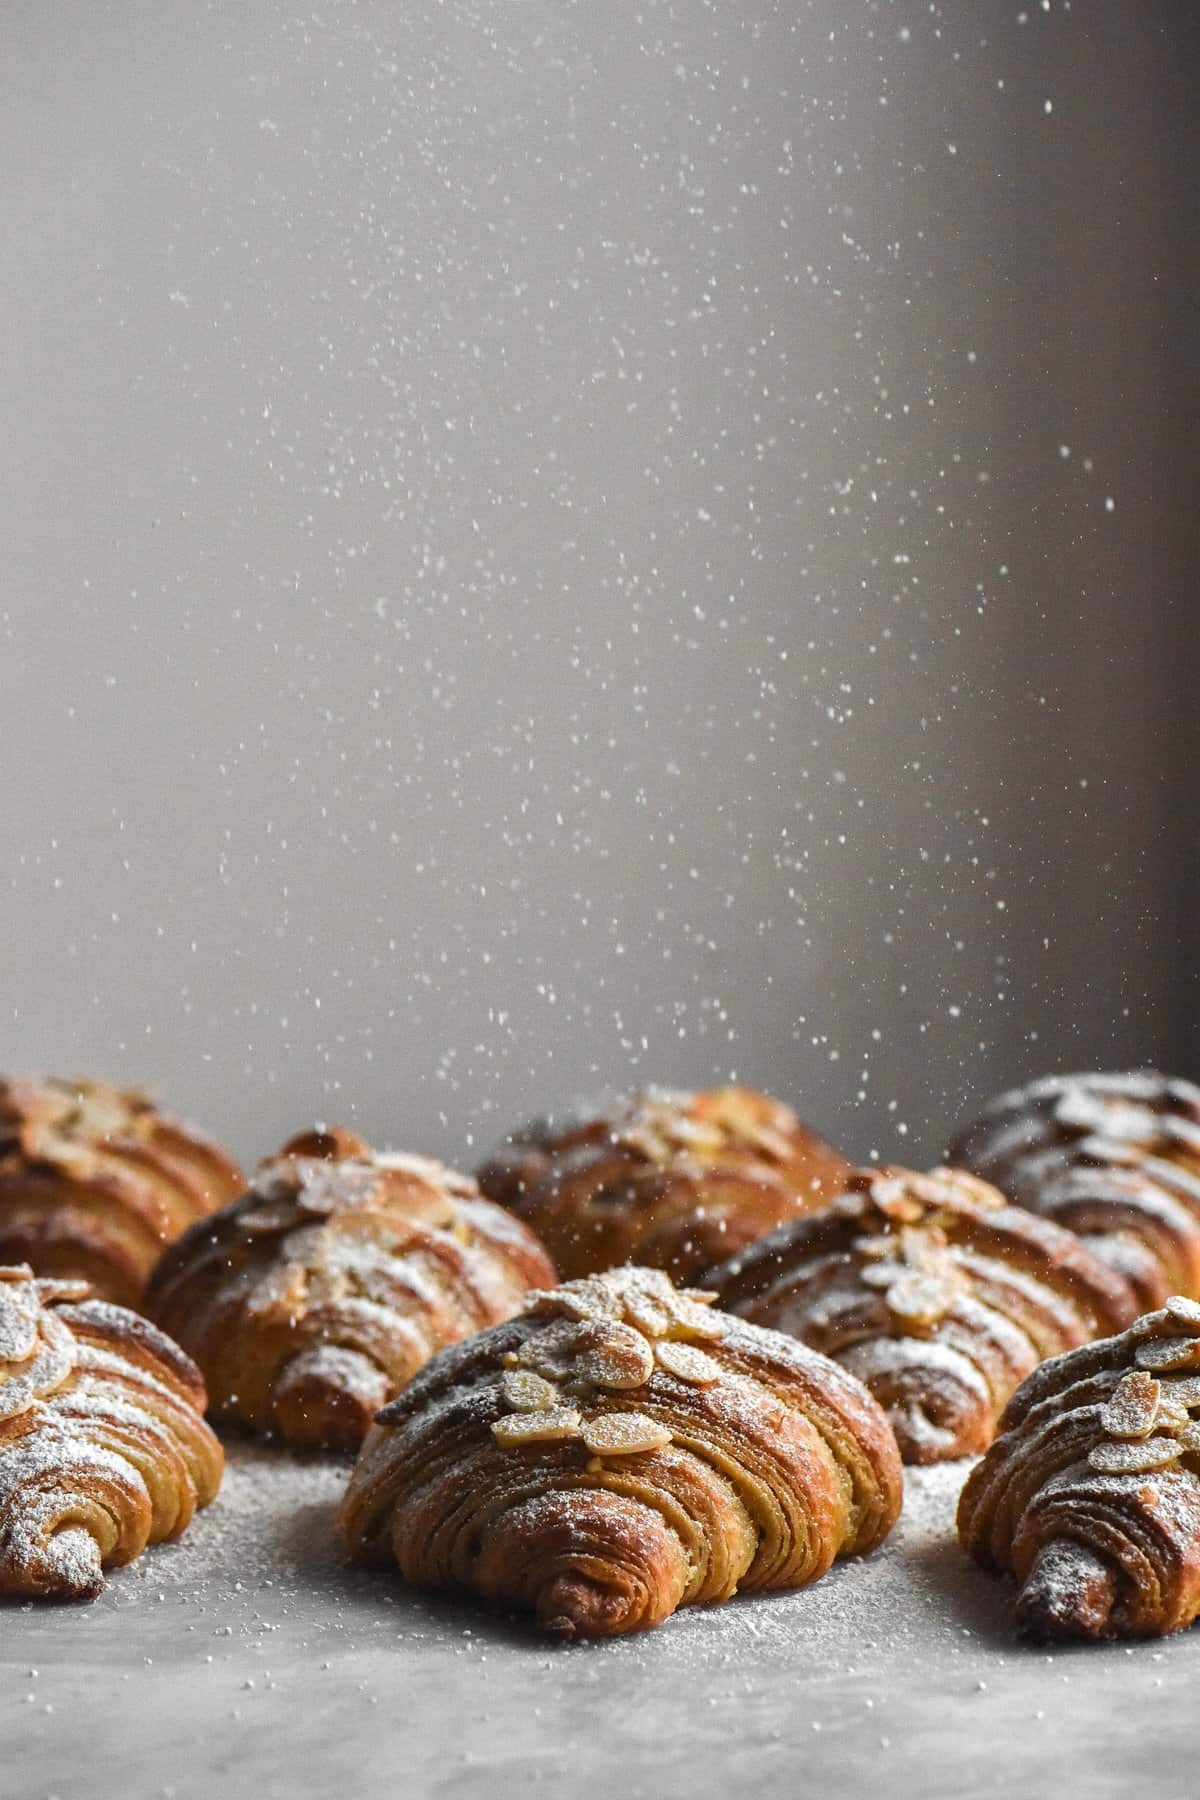 A side on view of gluten free almond croissants. The croissants are all facing the camera, exposing their lamination and beautiful layers. The croissants are being sprinkled with icing sugar that comes down from the top of the image